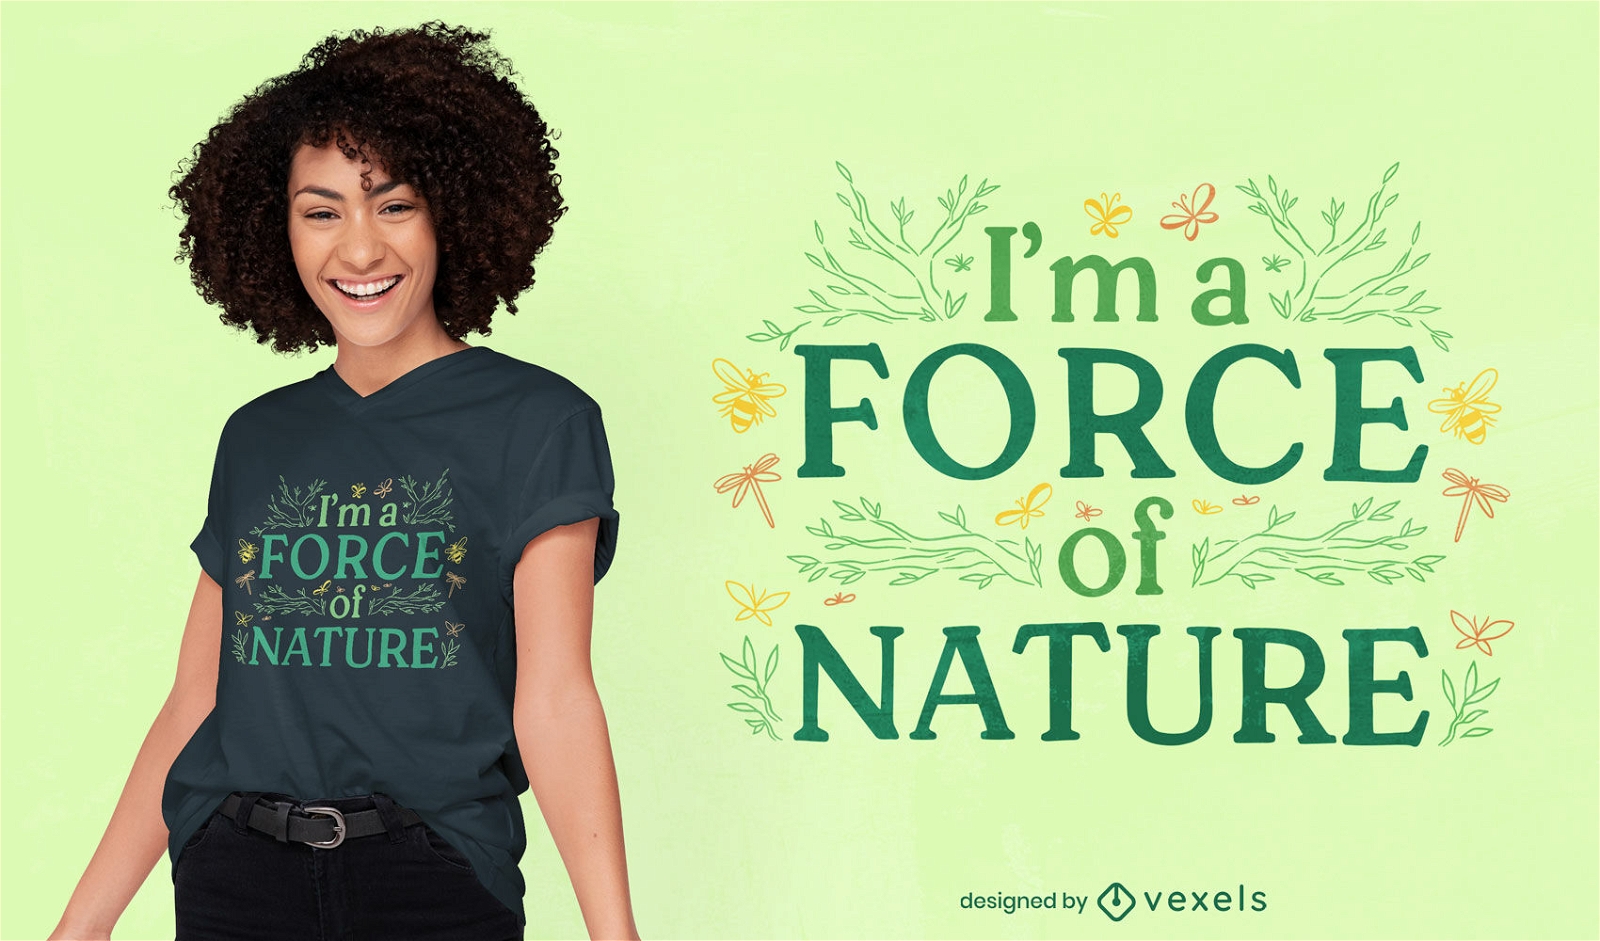 Force of nature quote floral t-shirt design